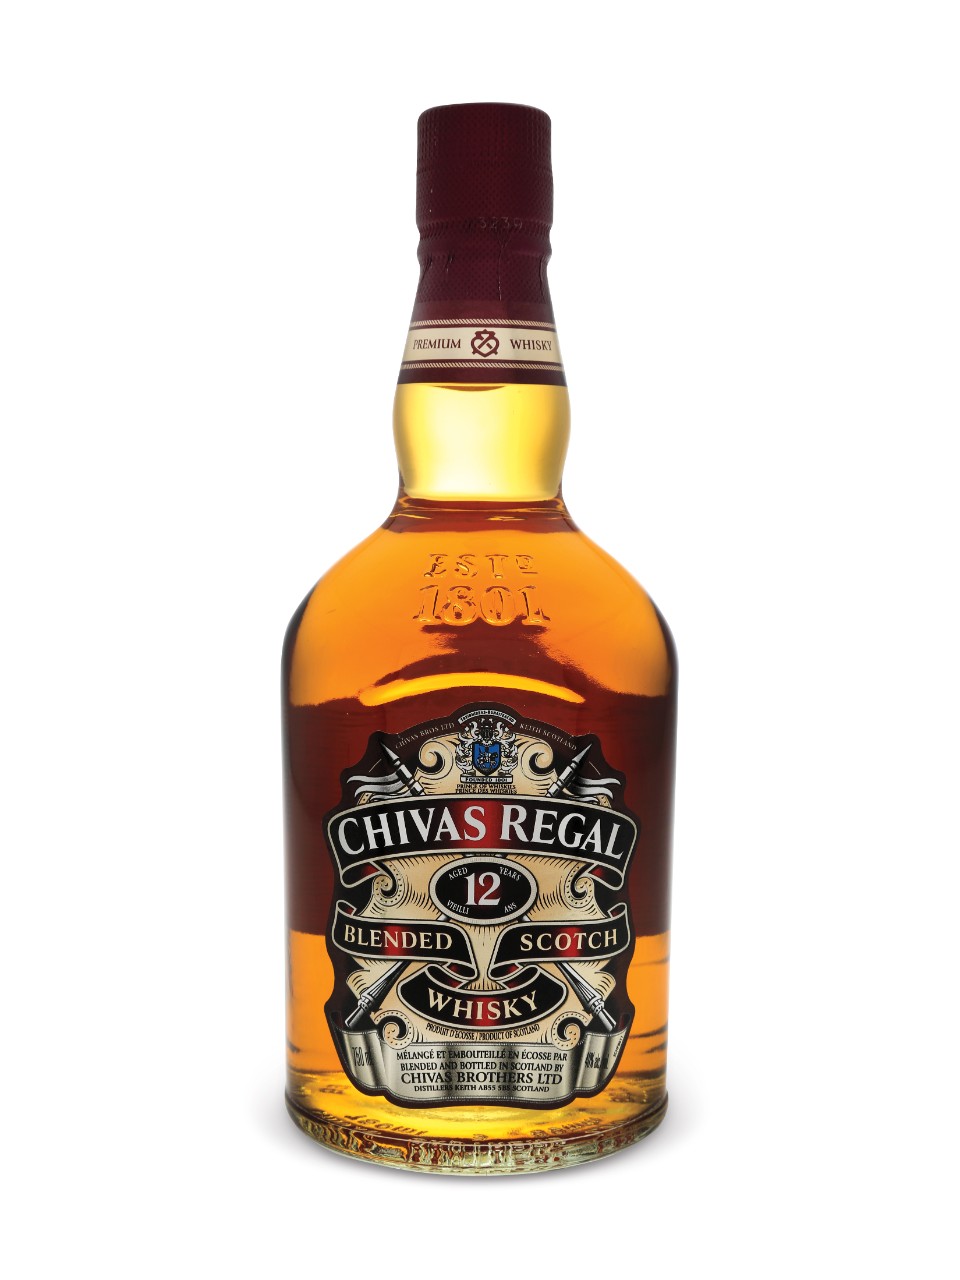 Chivas Regal 12 Years Old Scotch Whisky